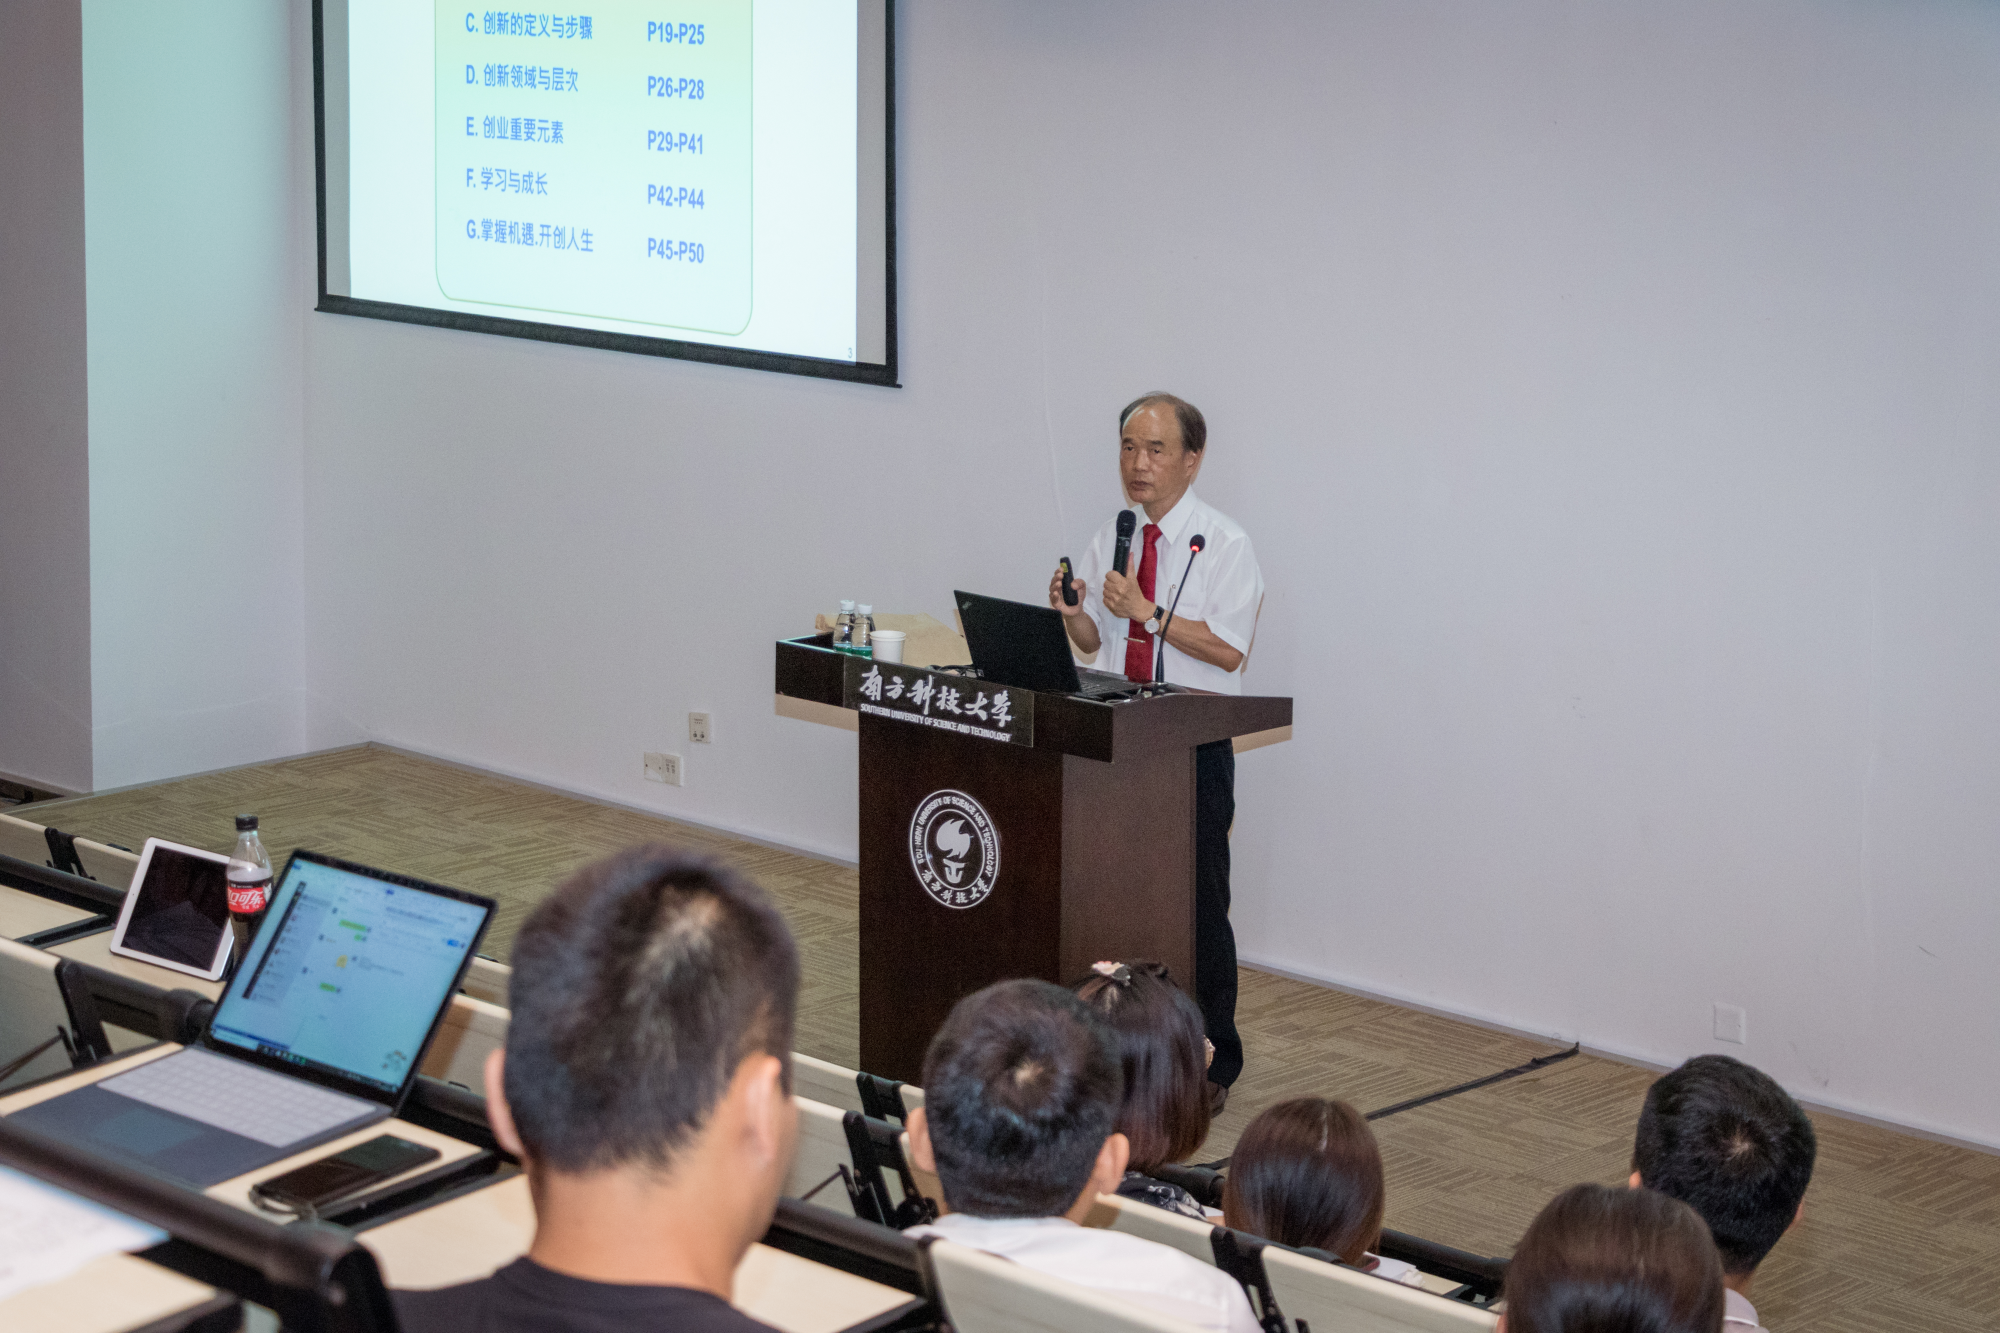 Chinese American Entrepreneur Lectured on Start-ups, Innovation, and Self-Improvement